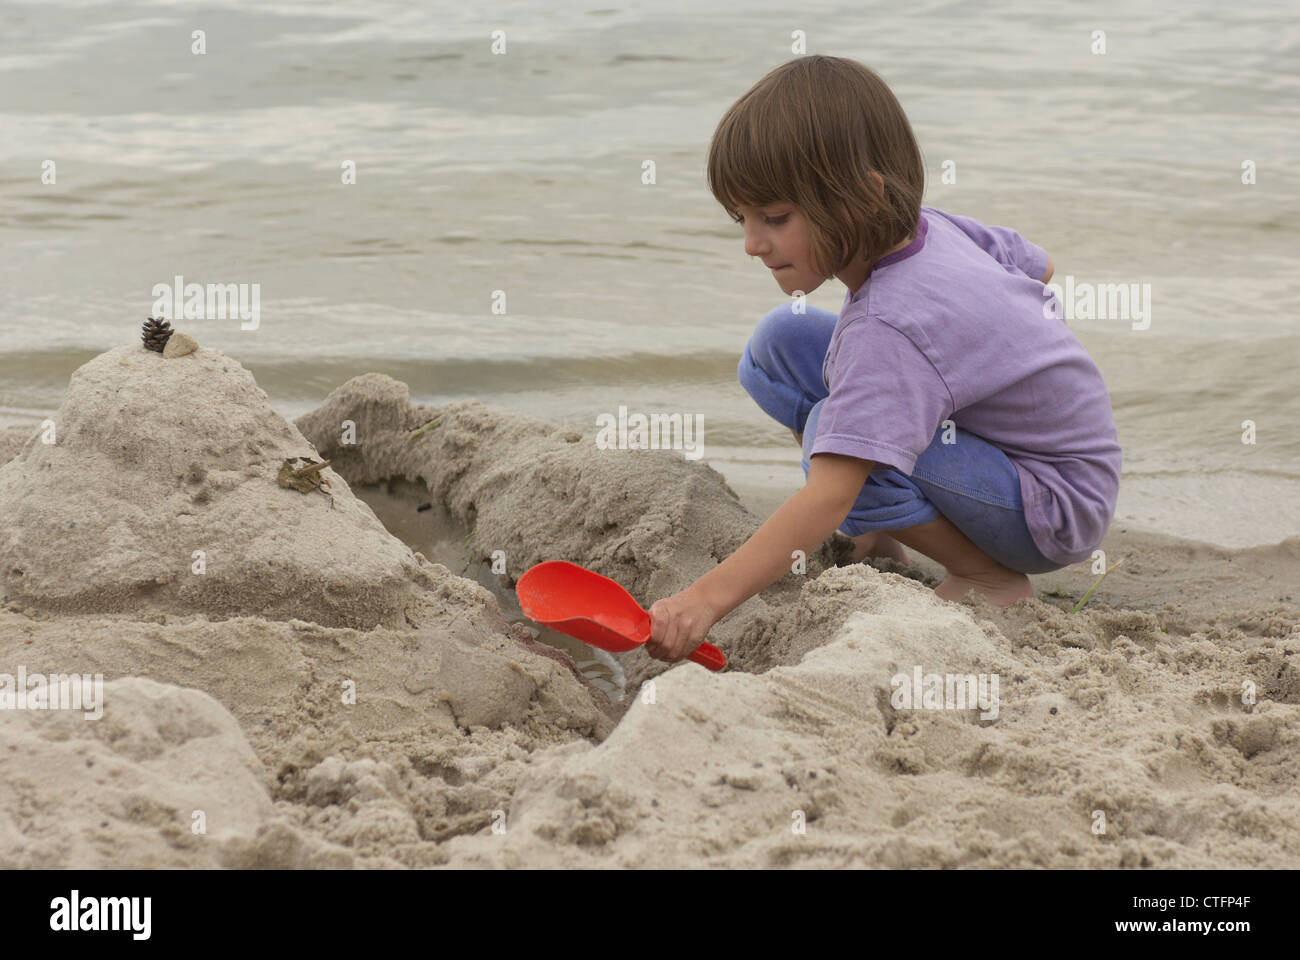 Child Girl (5-7 years old) making a sandcastle on the beach Stock Photo